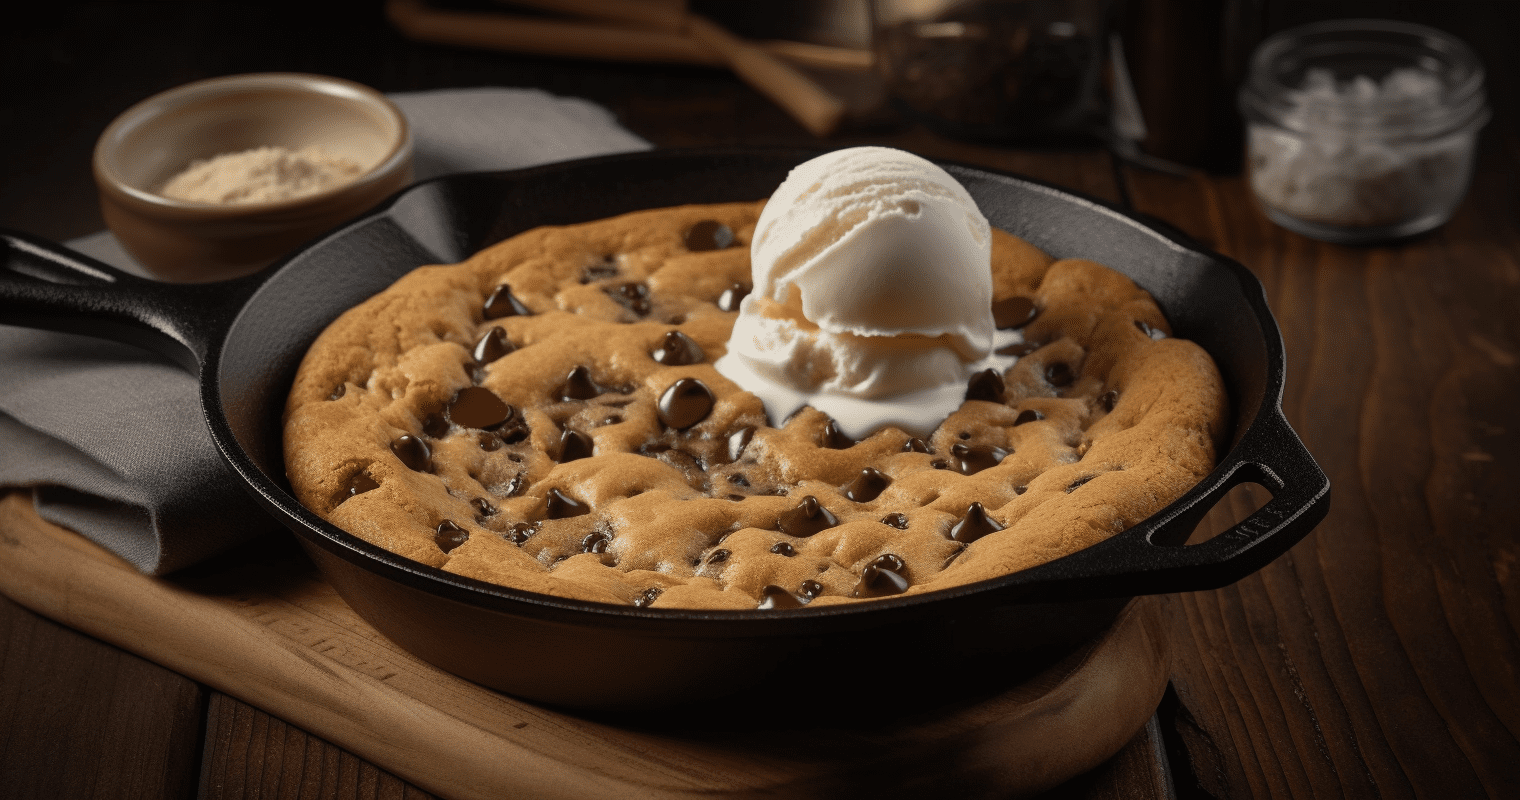 Skillet Chocolate Chip Cookie Image